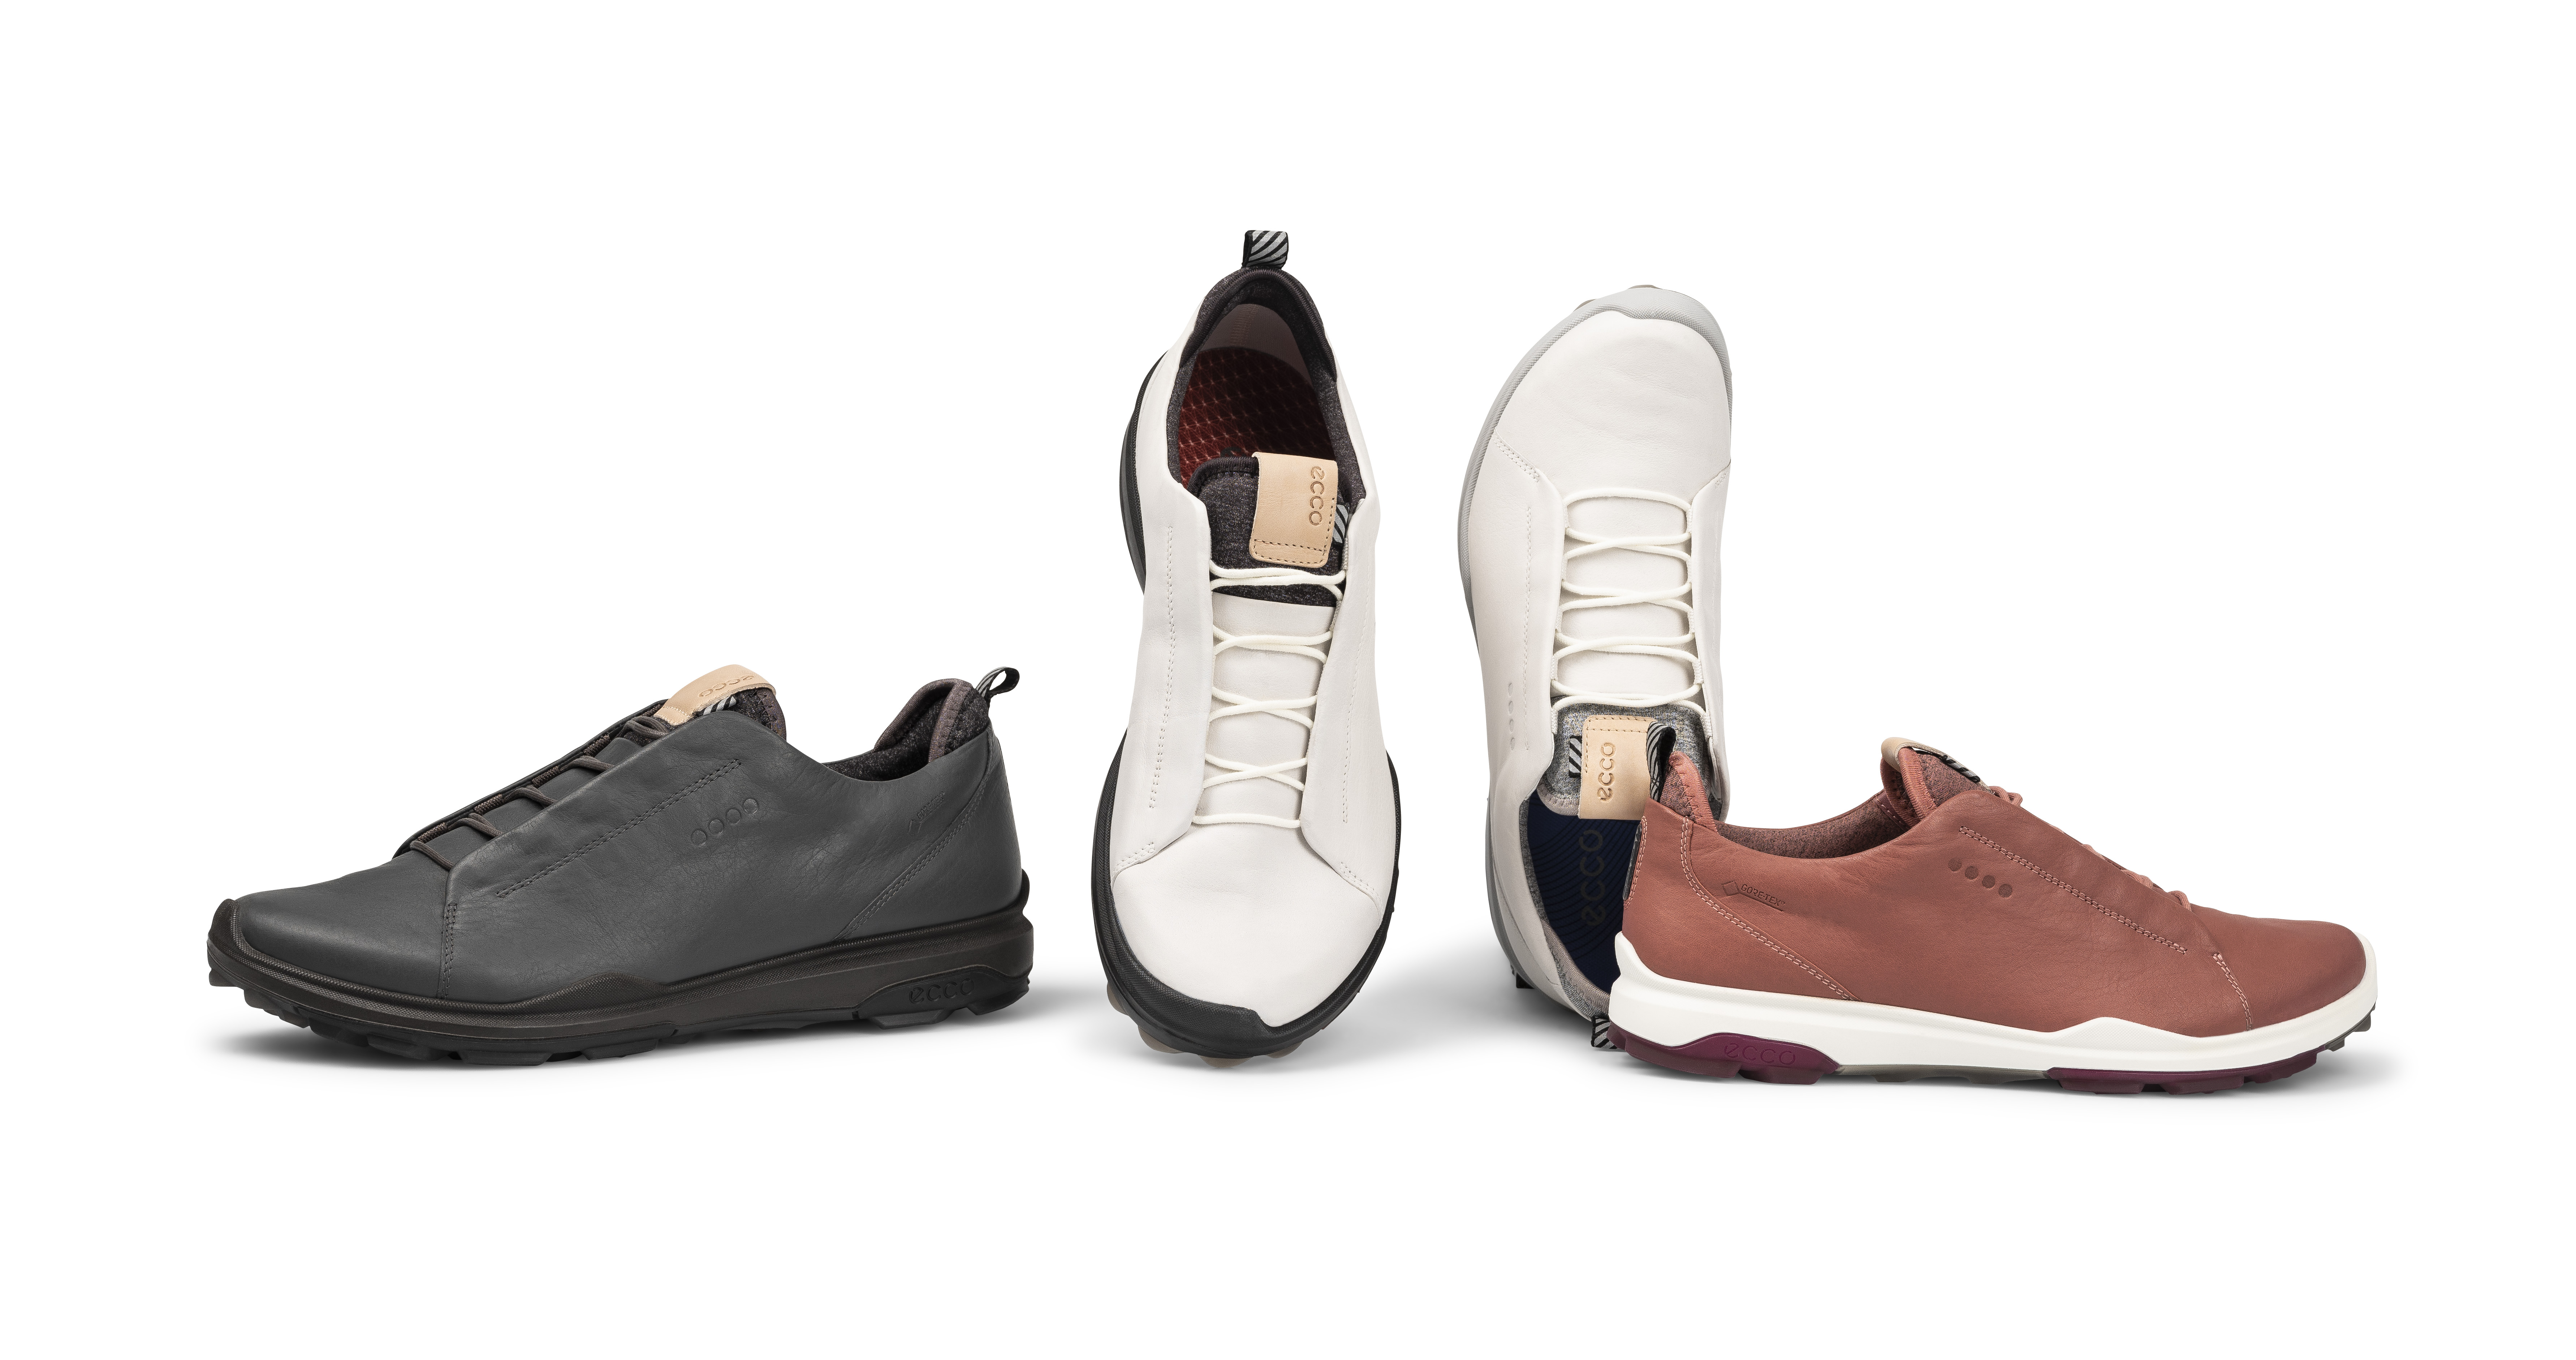 ECCO adds new additions to iconic BIOM 3 golf shoe |